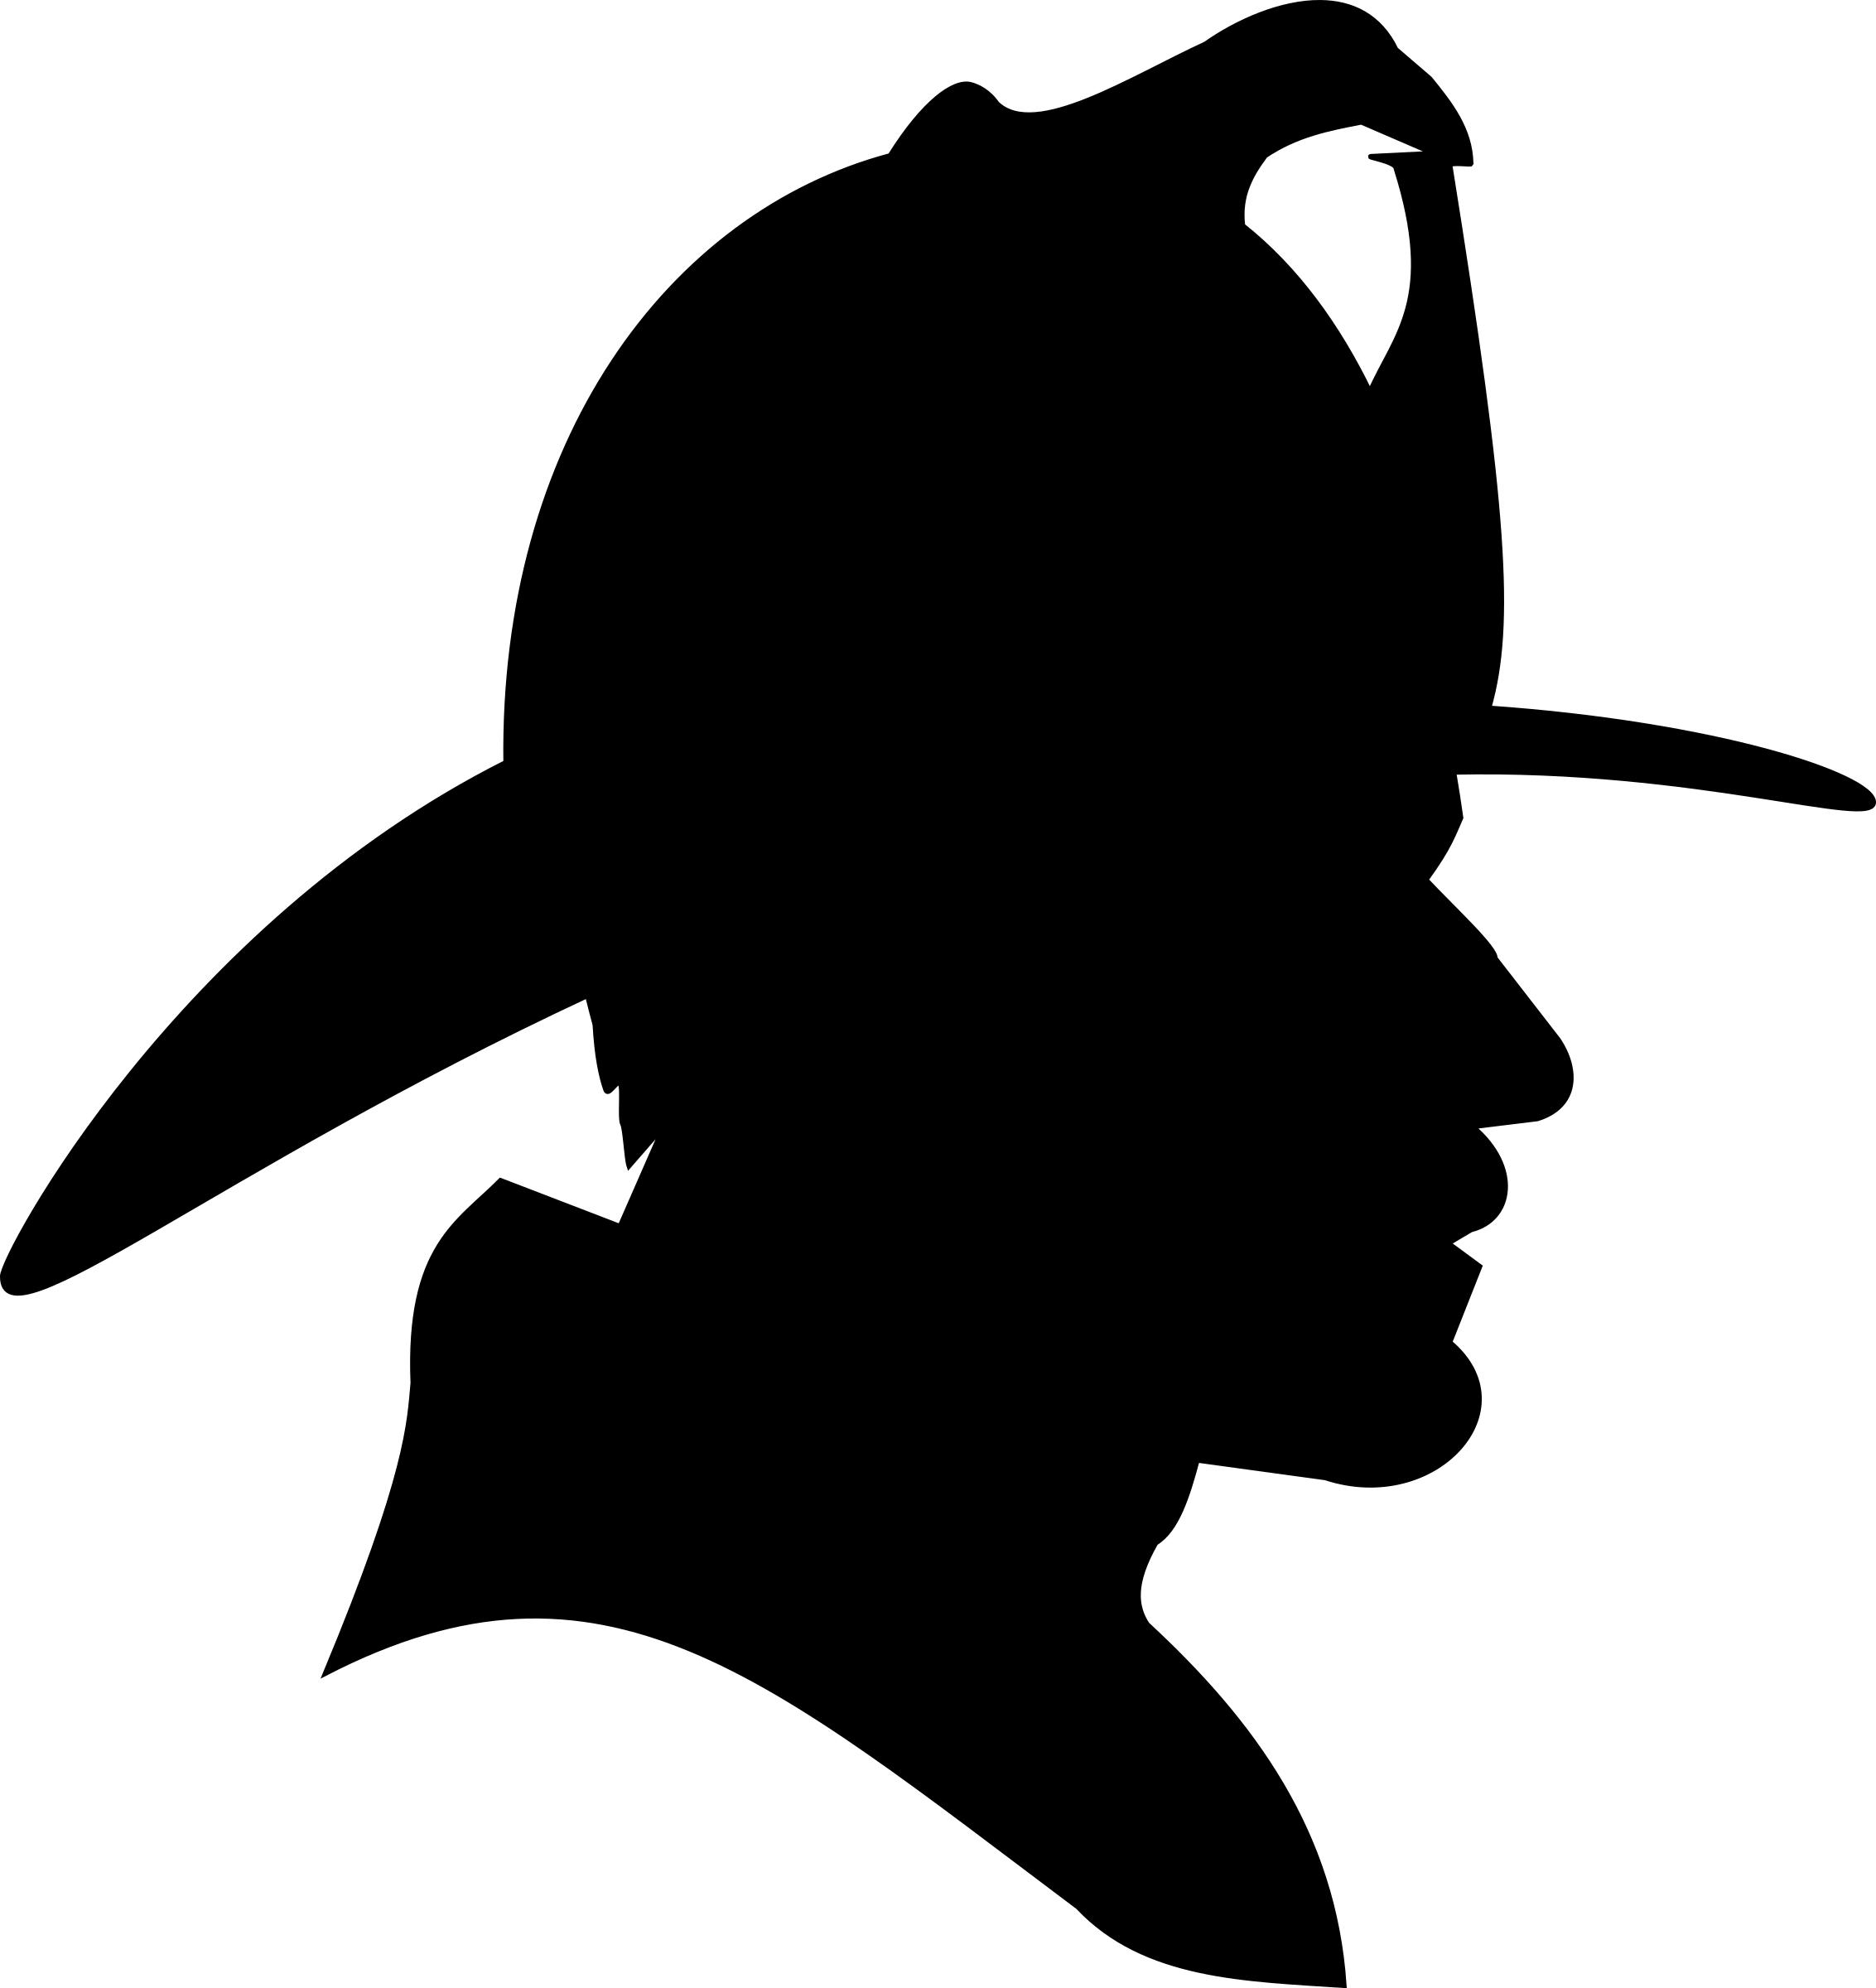 Firefighter Profile Silhouette png